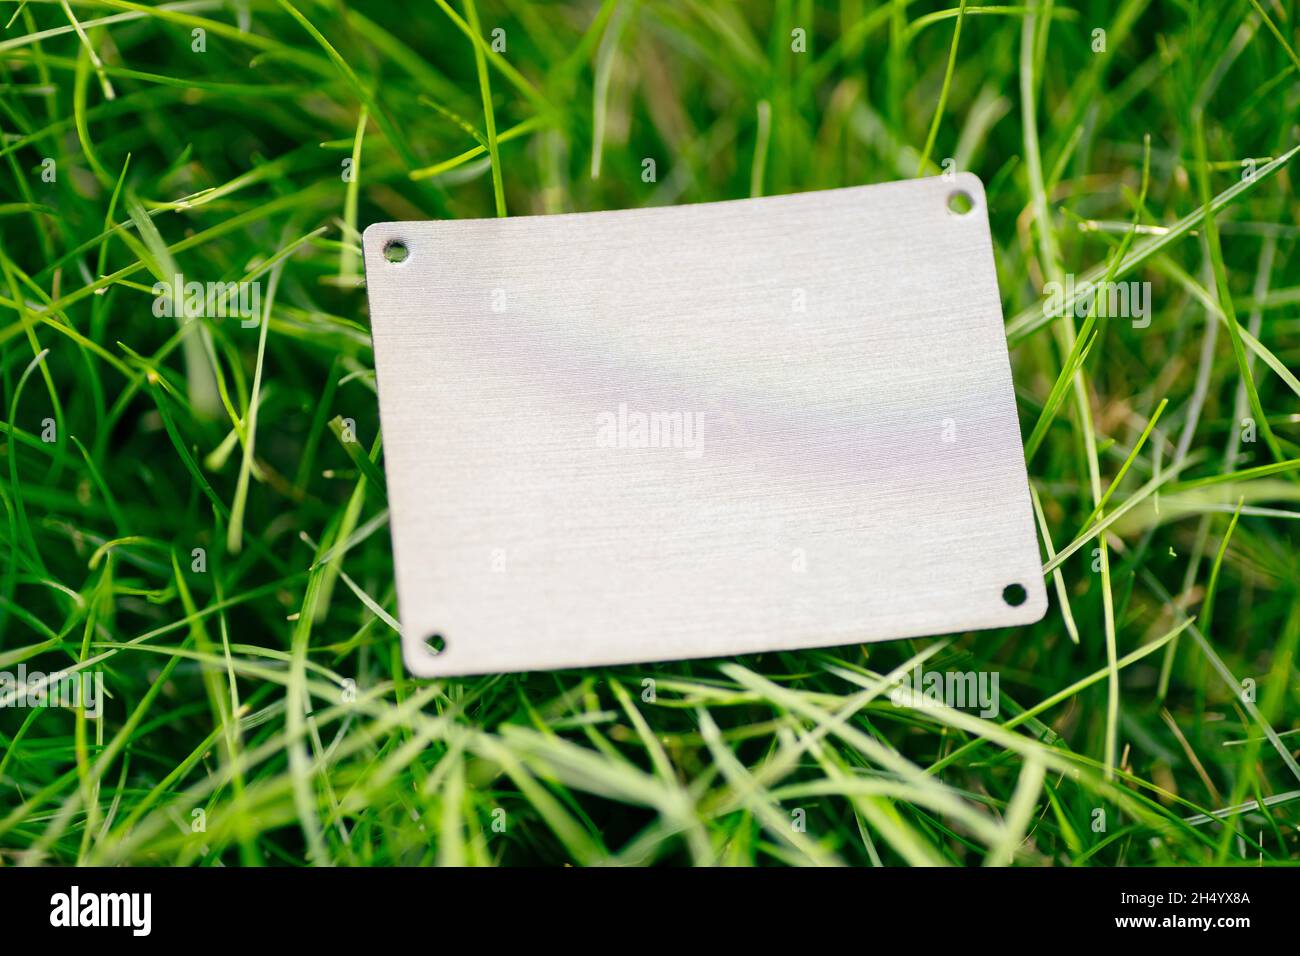 creative layout composition frame made of green grass lawn with square leather patch for clothing for factory flat lay and copy space for logo Stock Photo